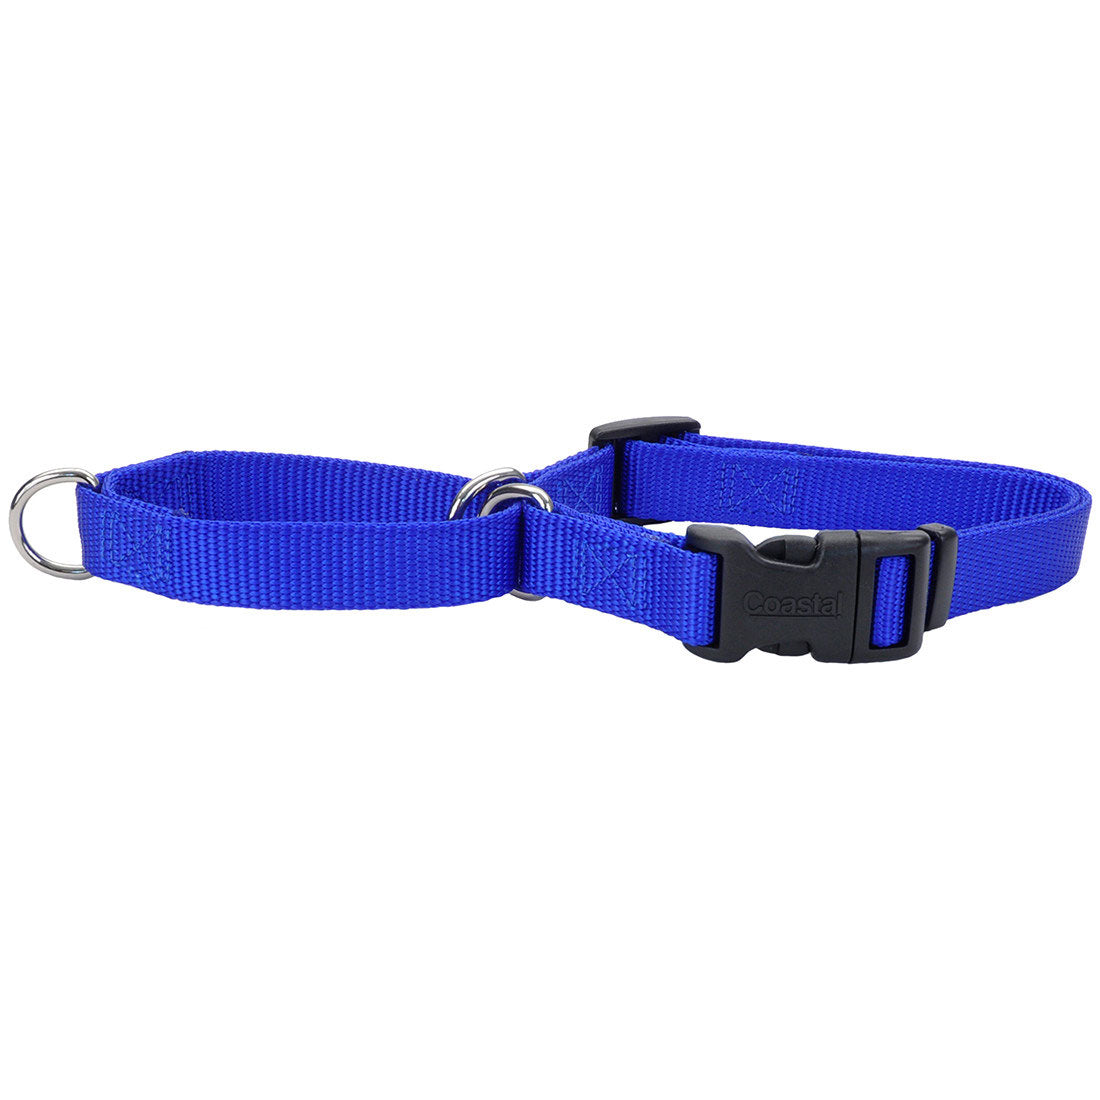 No! Slip® Martingale Adjustable Dog Collar with Buckle by Coastal, Blue